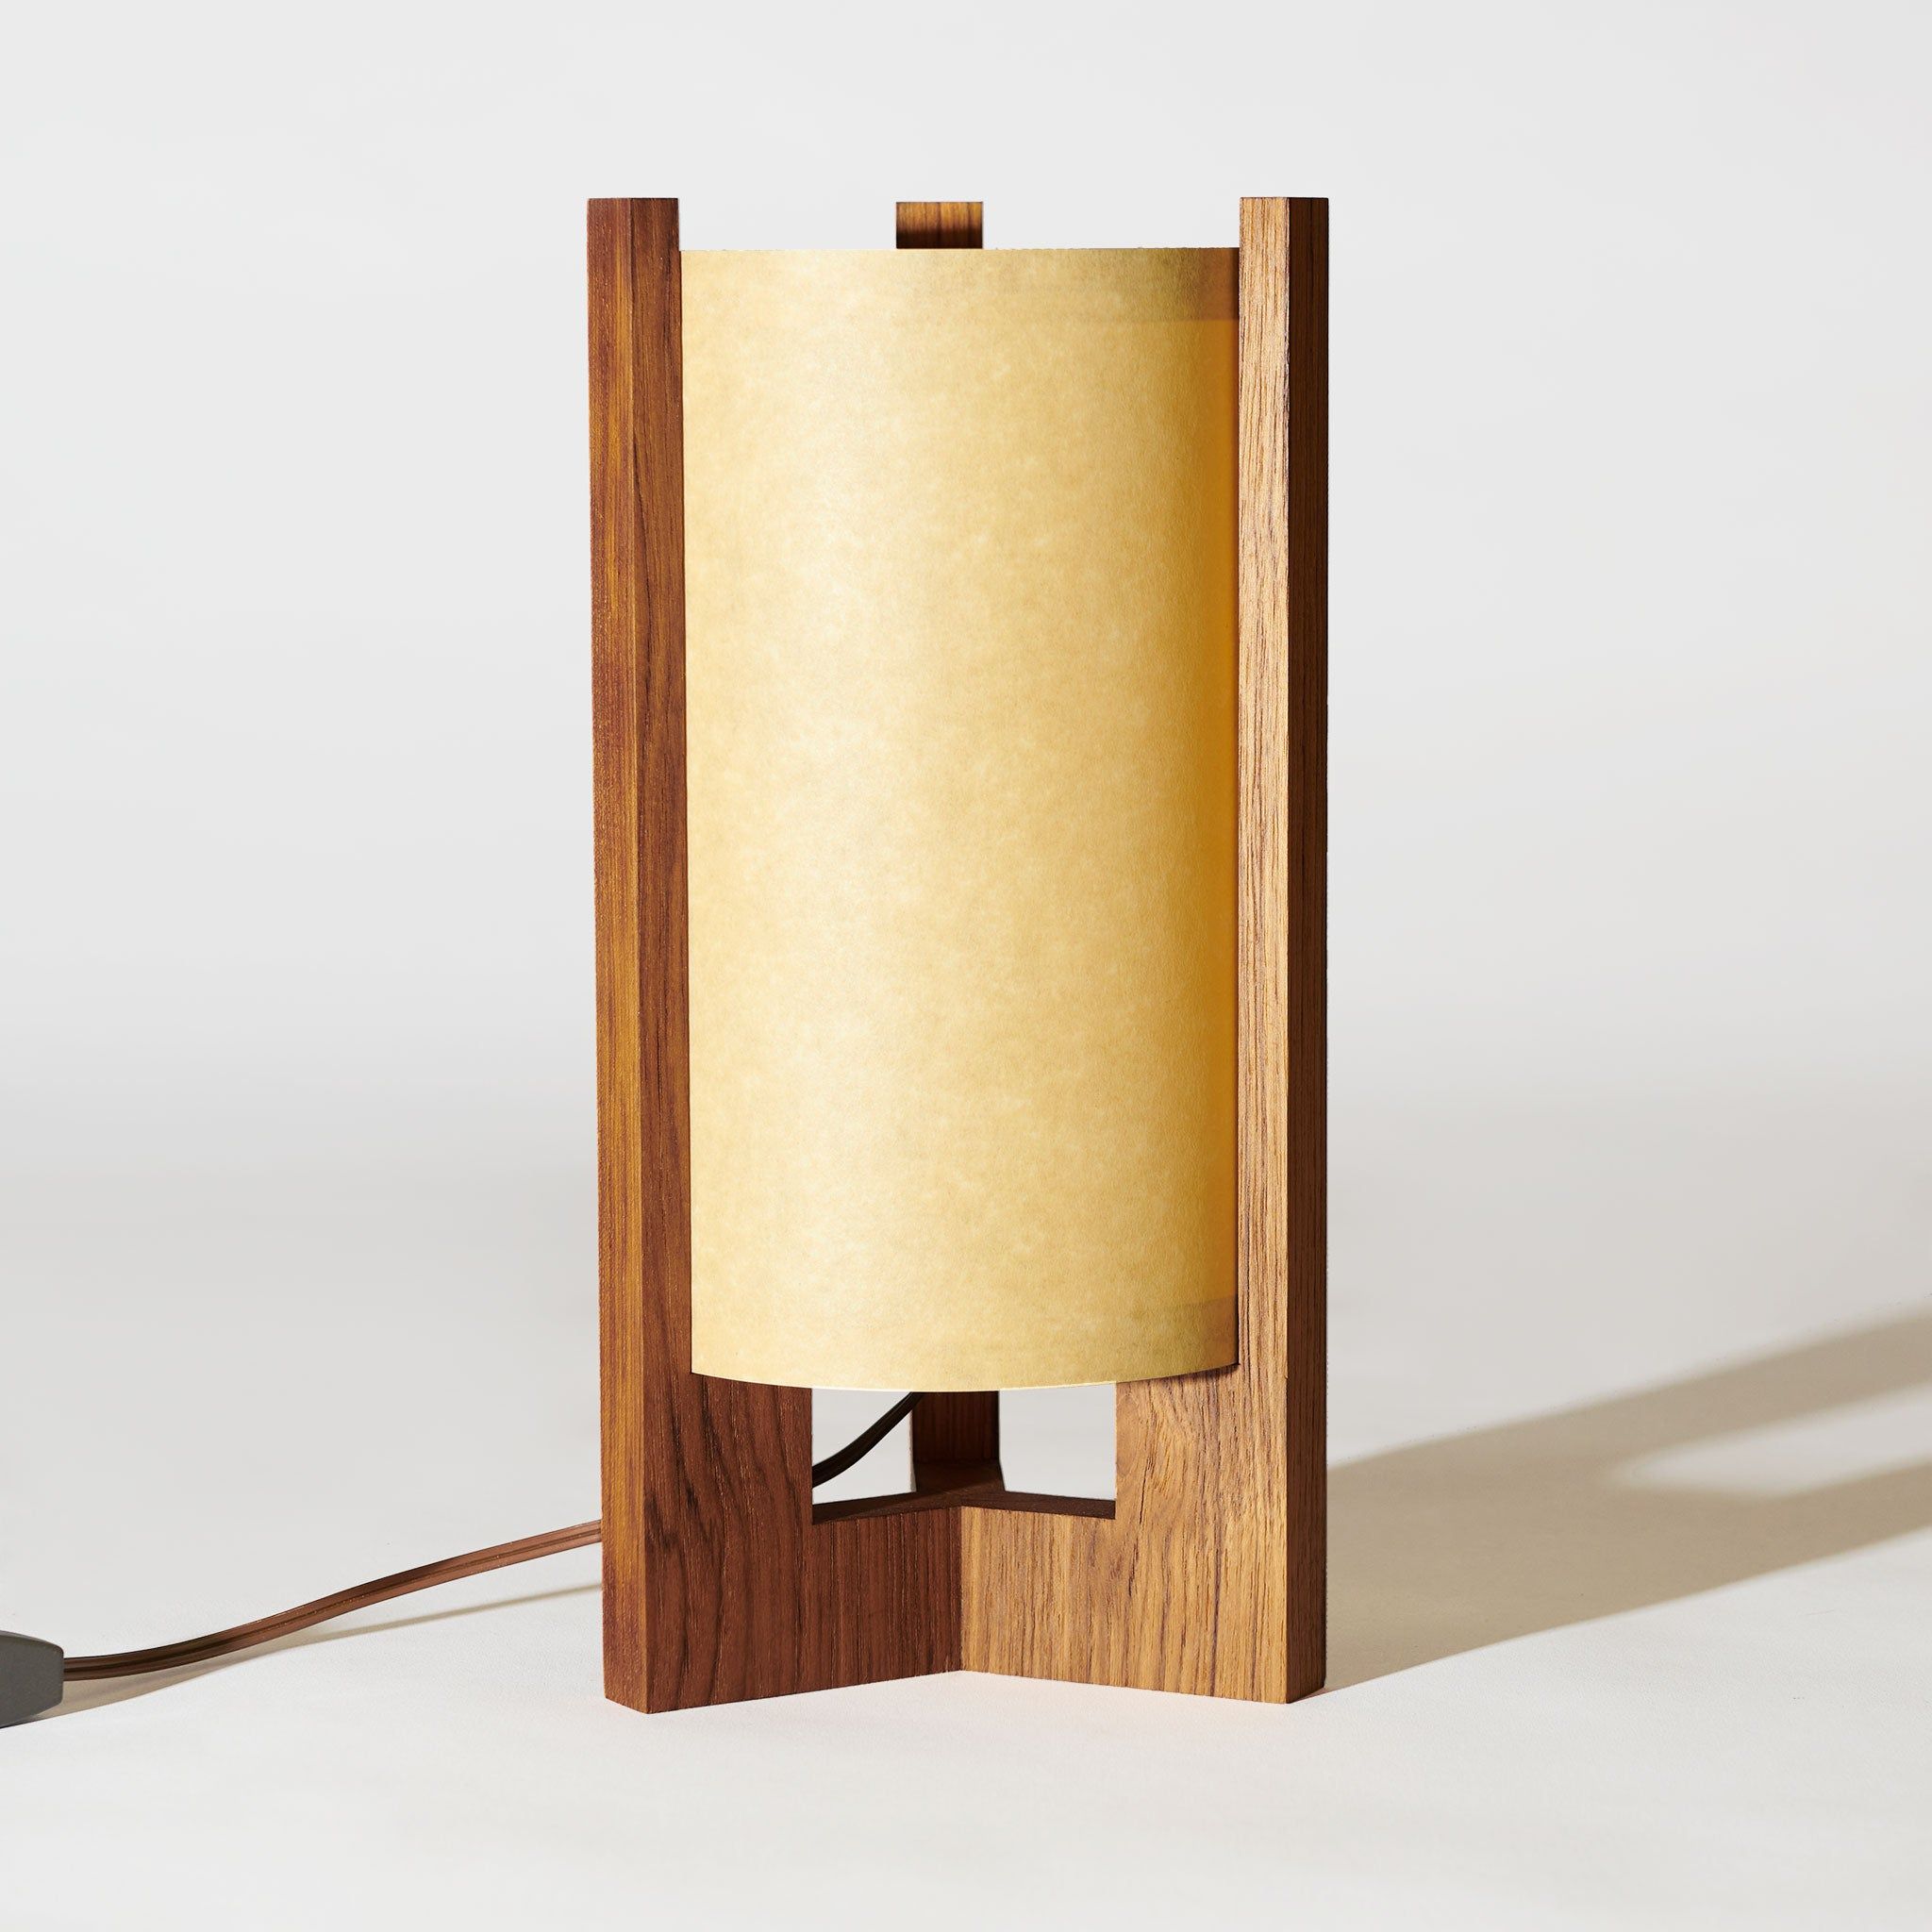 Brighten Up Your Space with Beautiful Wood Lamps